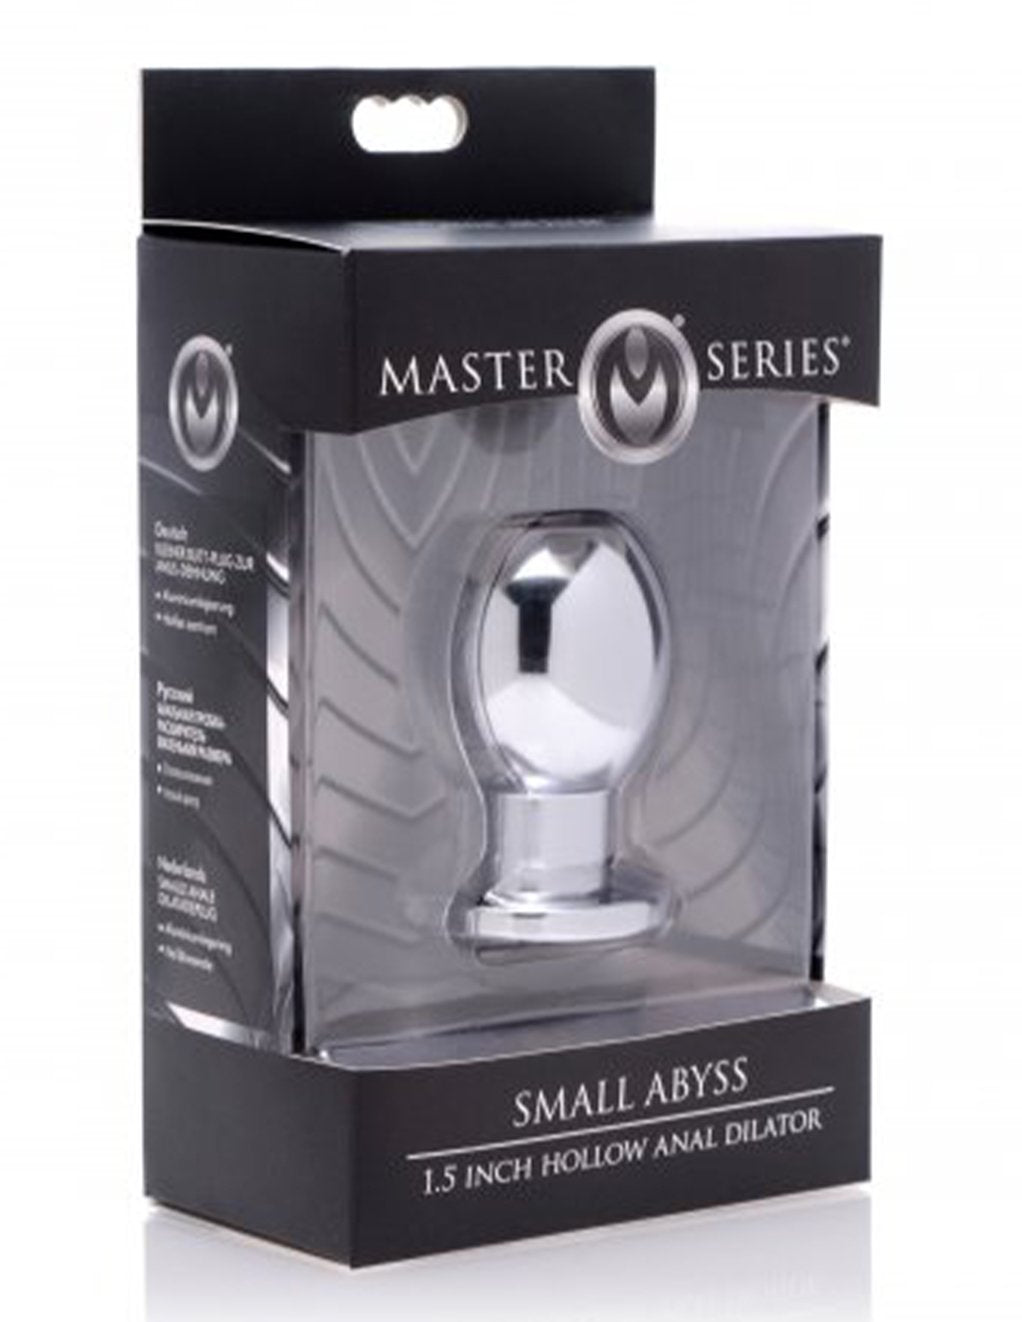 Master Series Abyss Hollow Anal Dilator- Small- Box